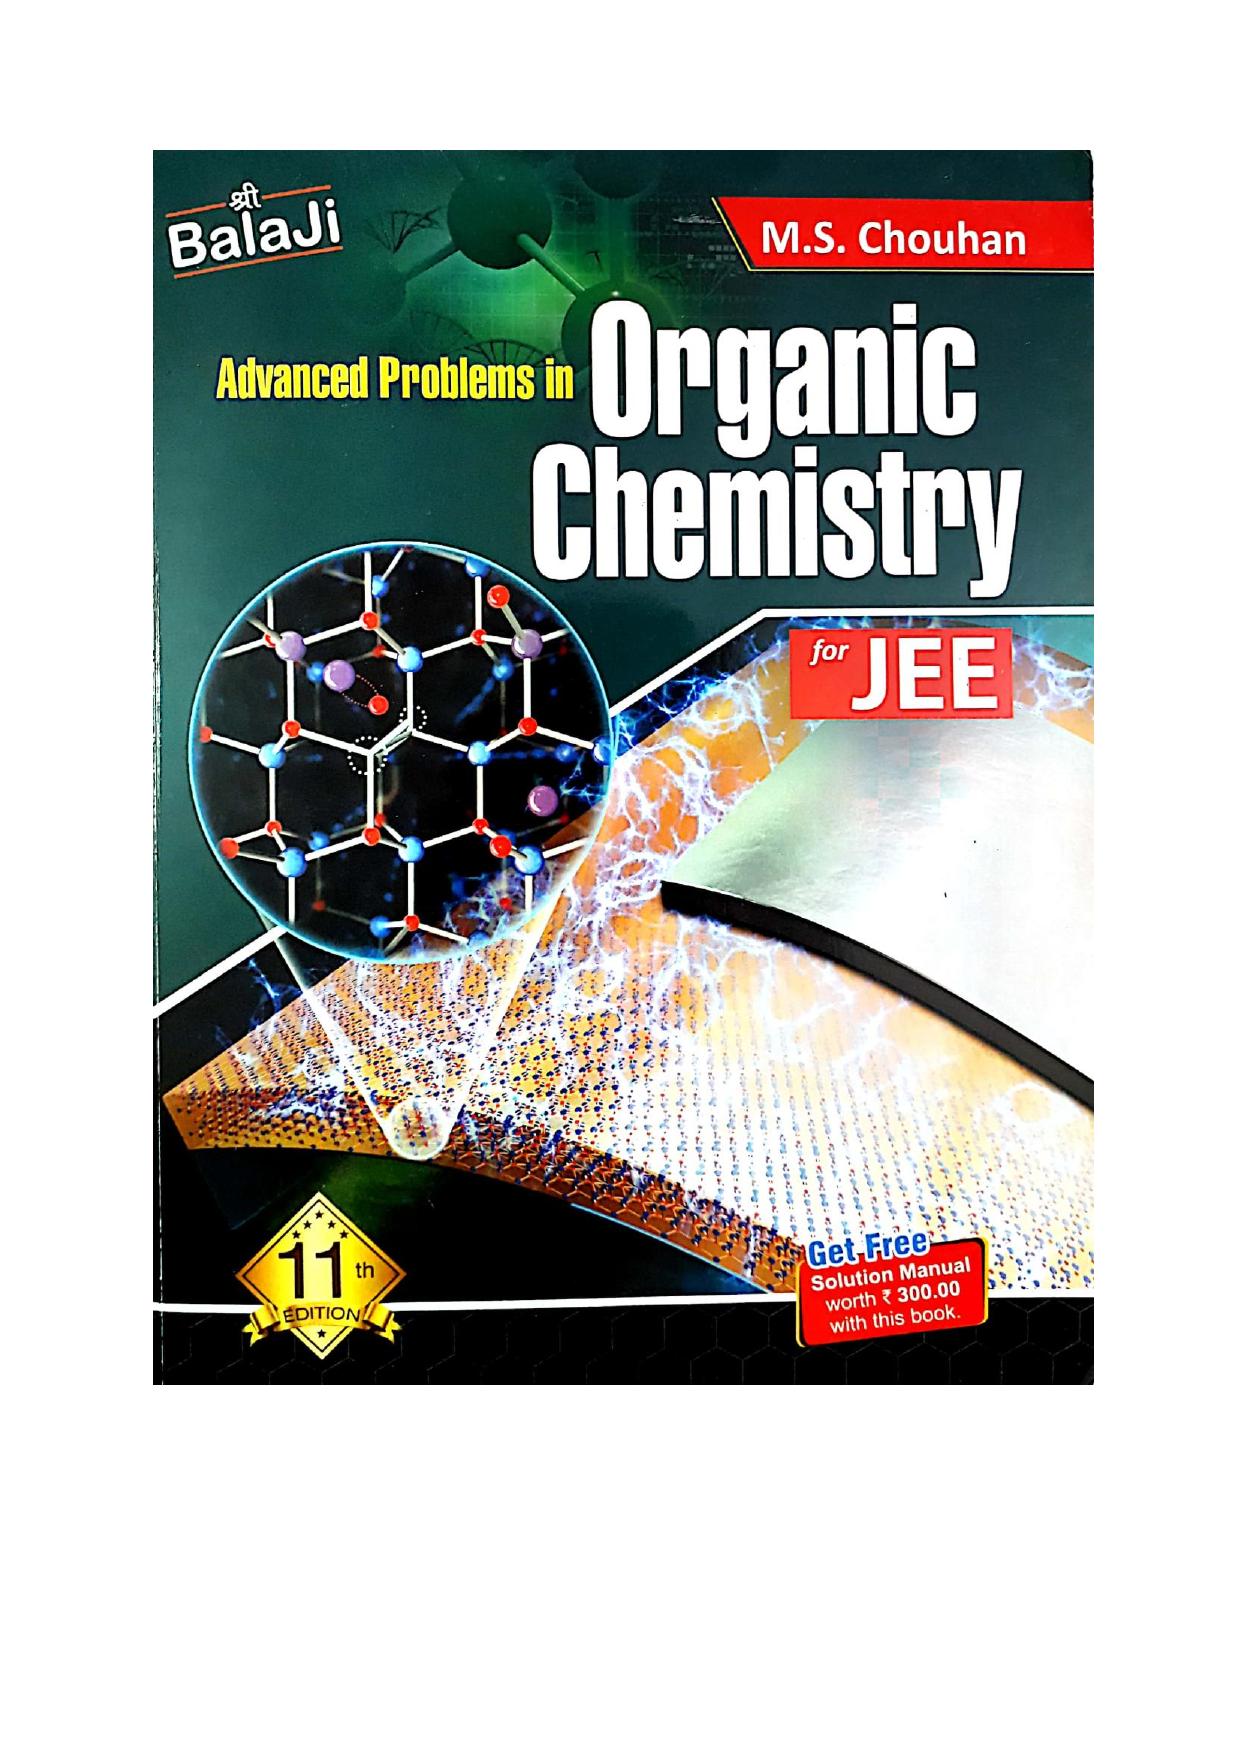 Balaji Advanced Problems in Organic Chemistry Part 1 upto page 240 by M S Chouhan for IIT JEE main advanced and Chemistry Olympiad NSEC INChO 2018